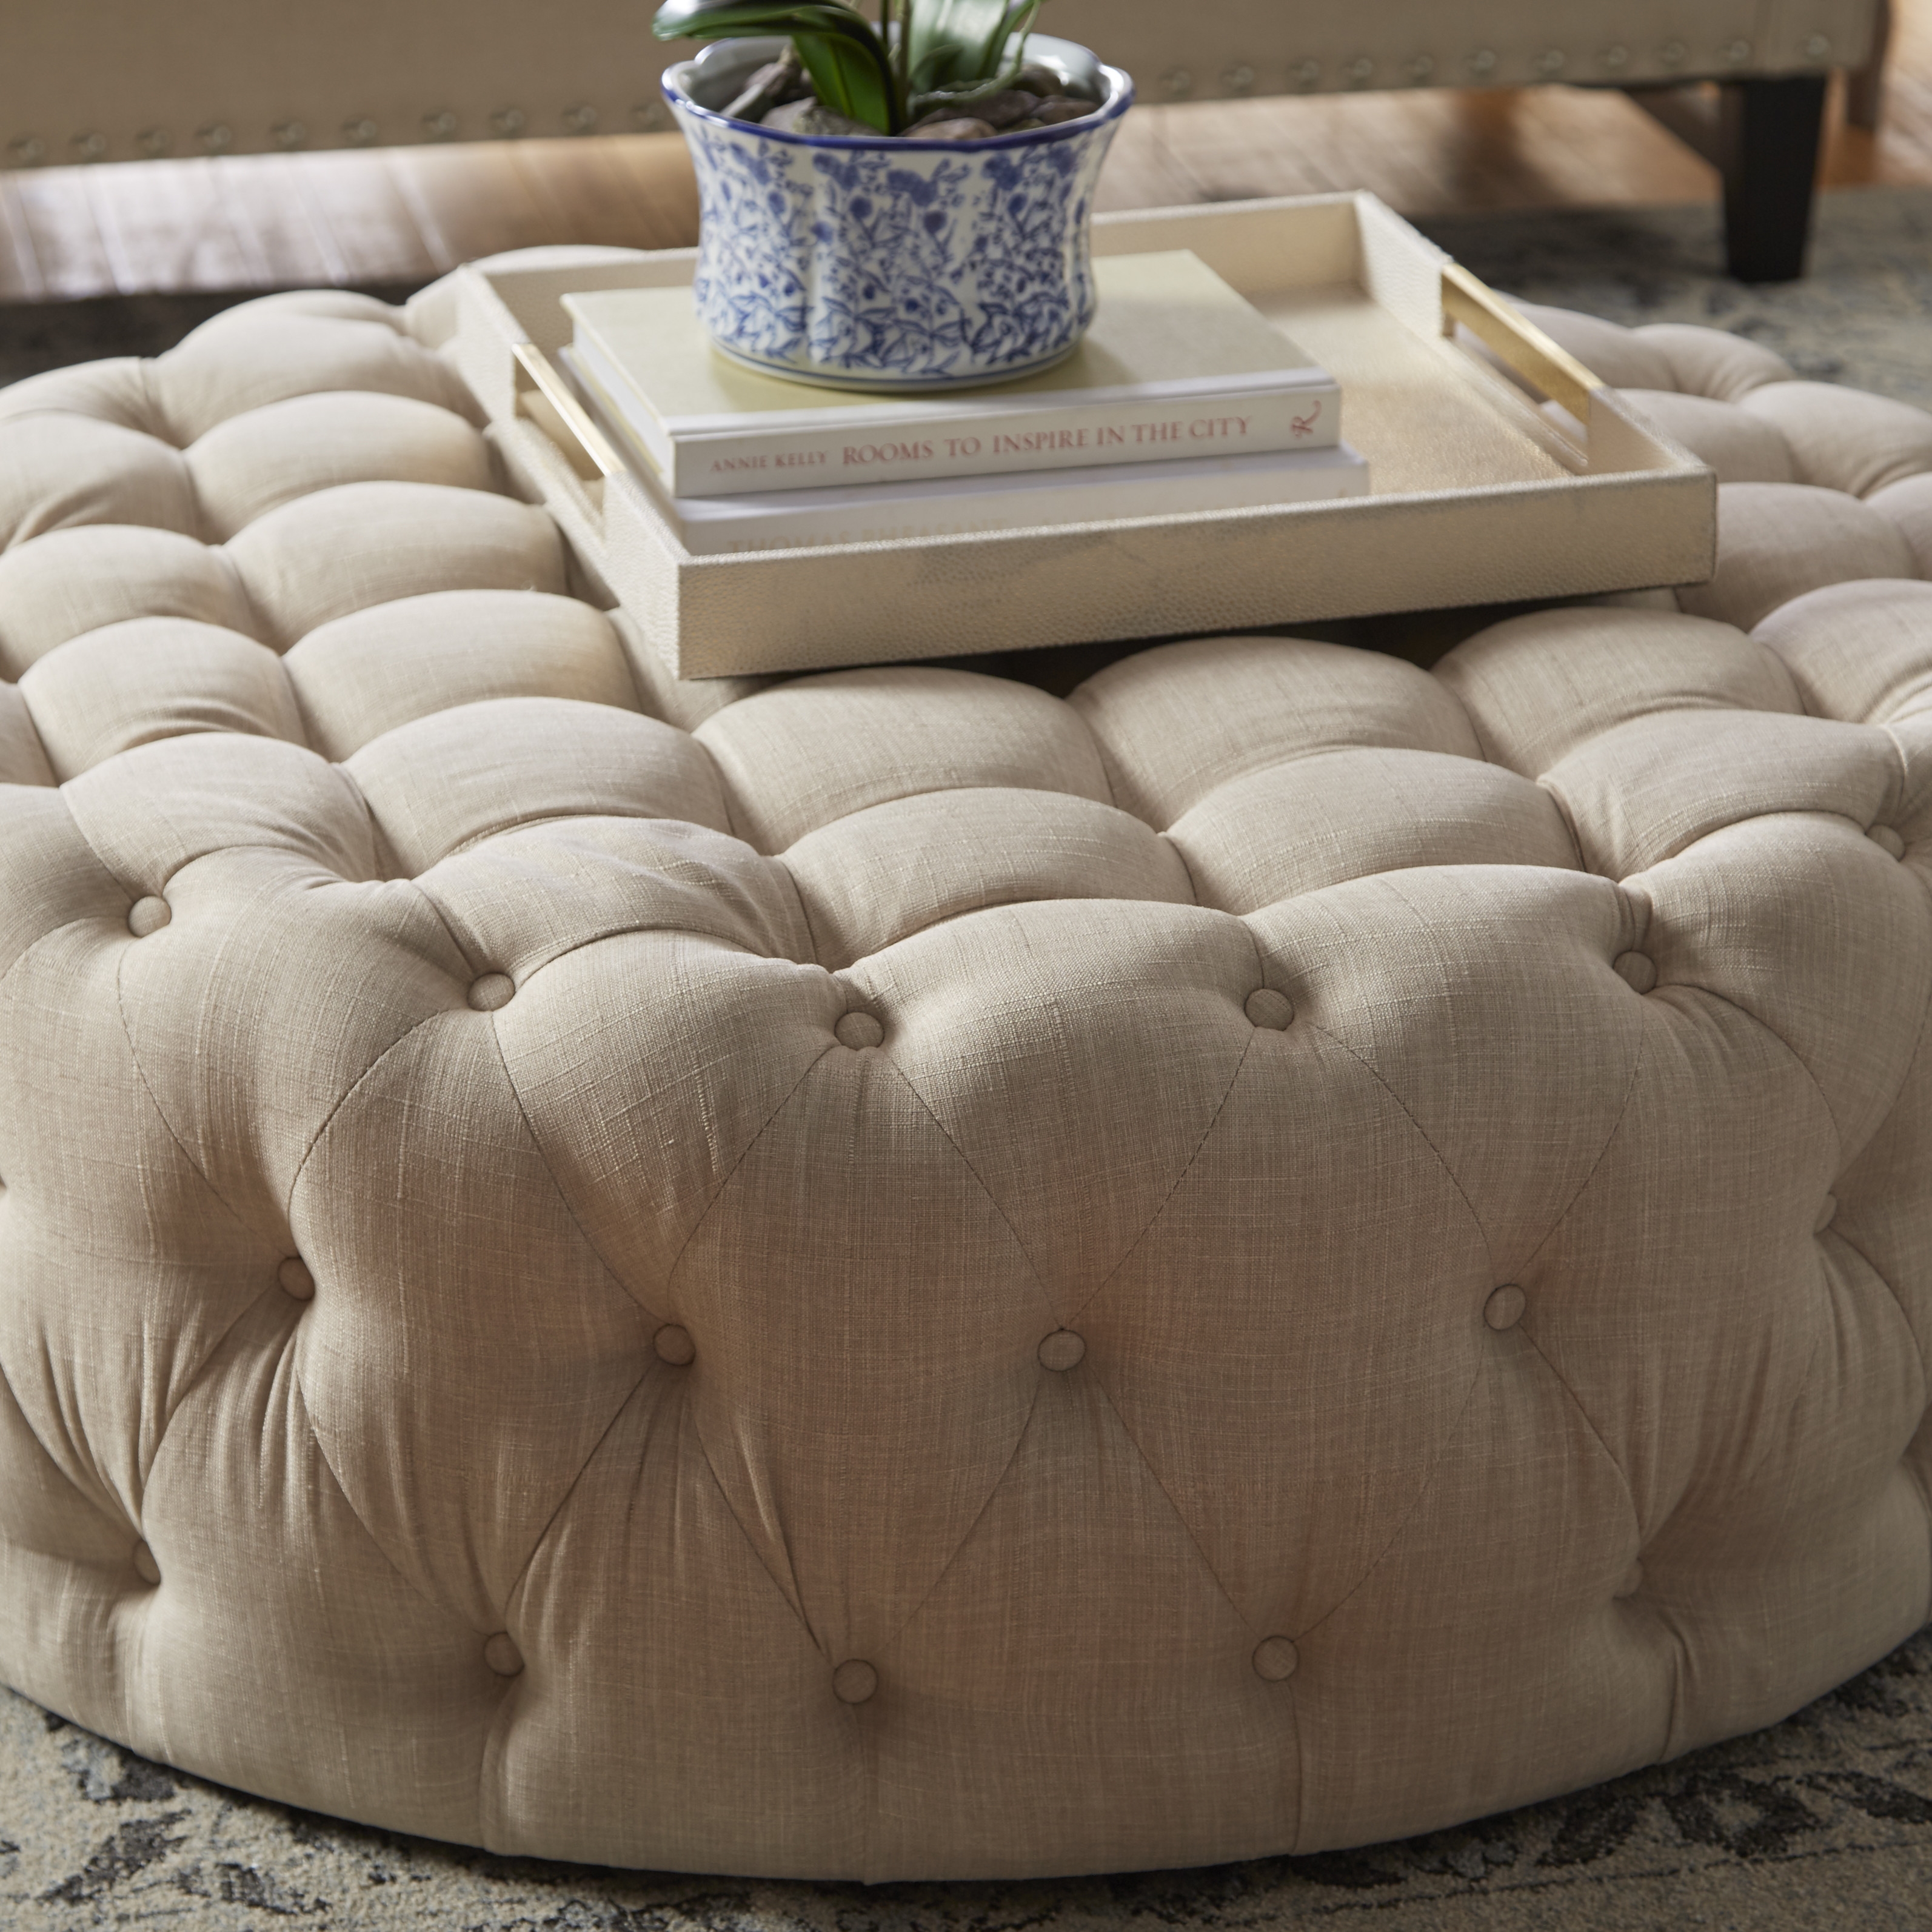 Bourges Round Tufted Cocktail Ottoman - Beige - Image 3